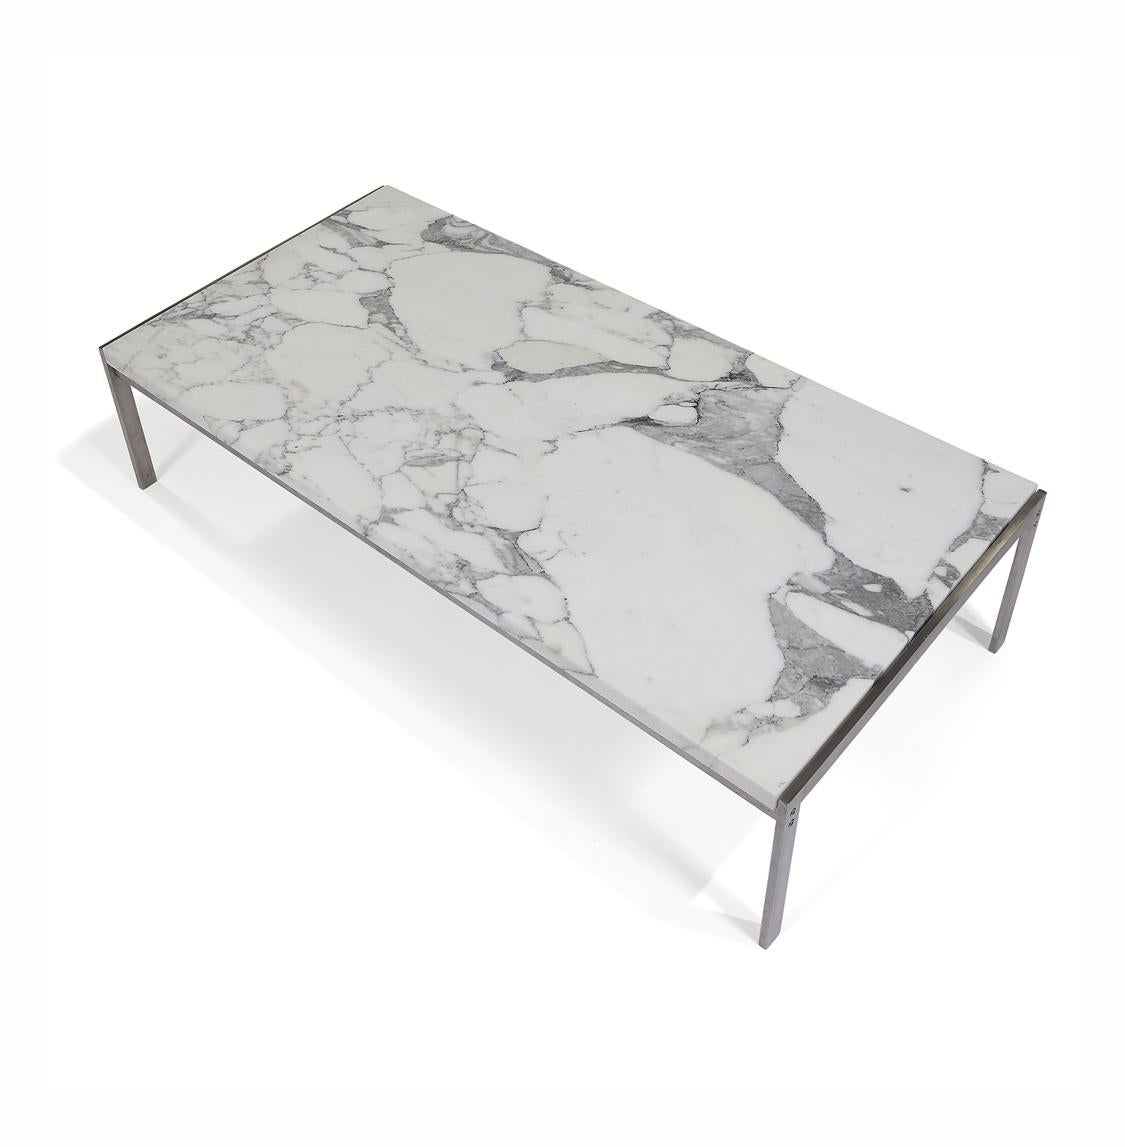 Poul Kjærholm PK64 coffee table, Denmark, 1970s by Kold Christensen.  Marble top and steel with impressed mark to base.